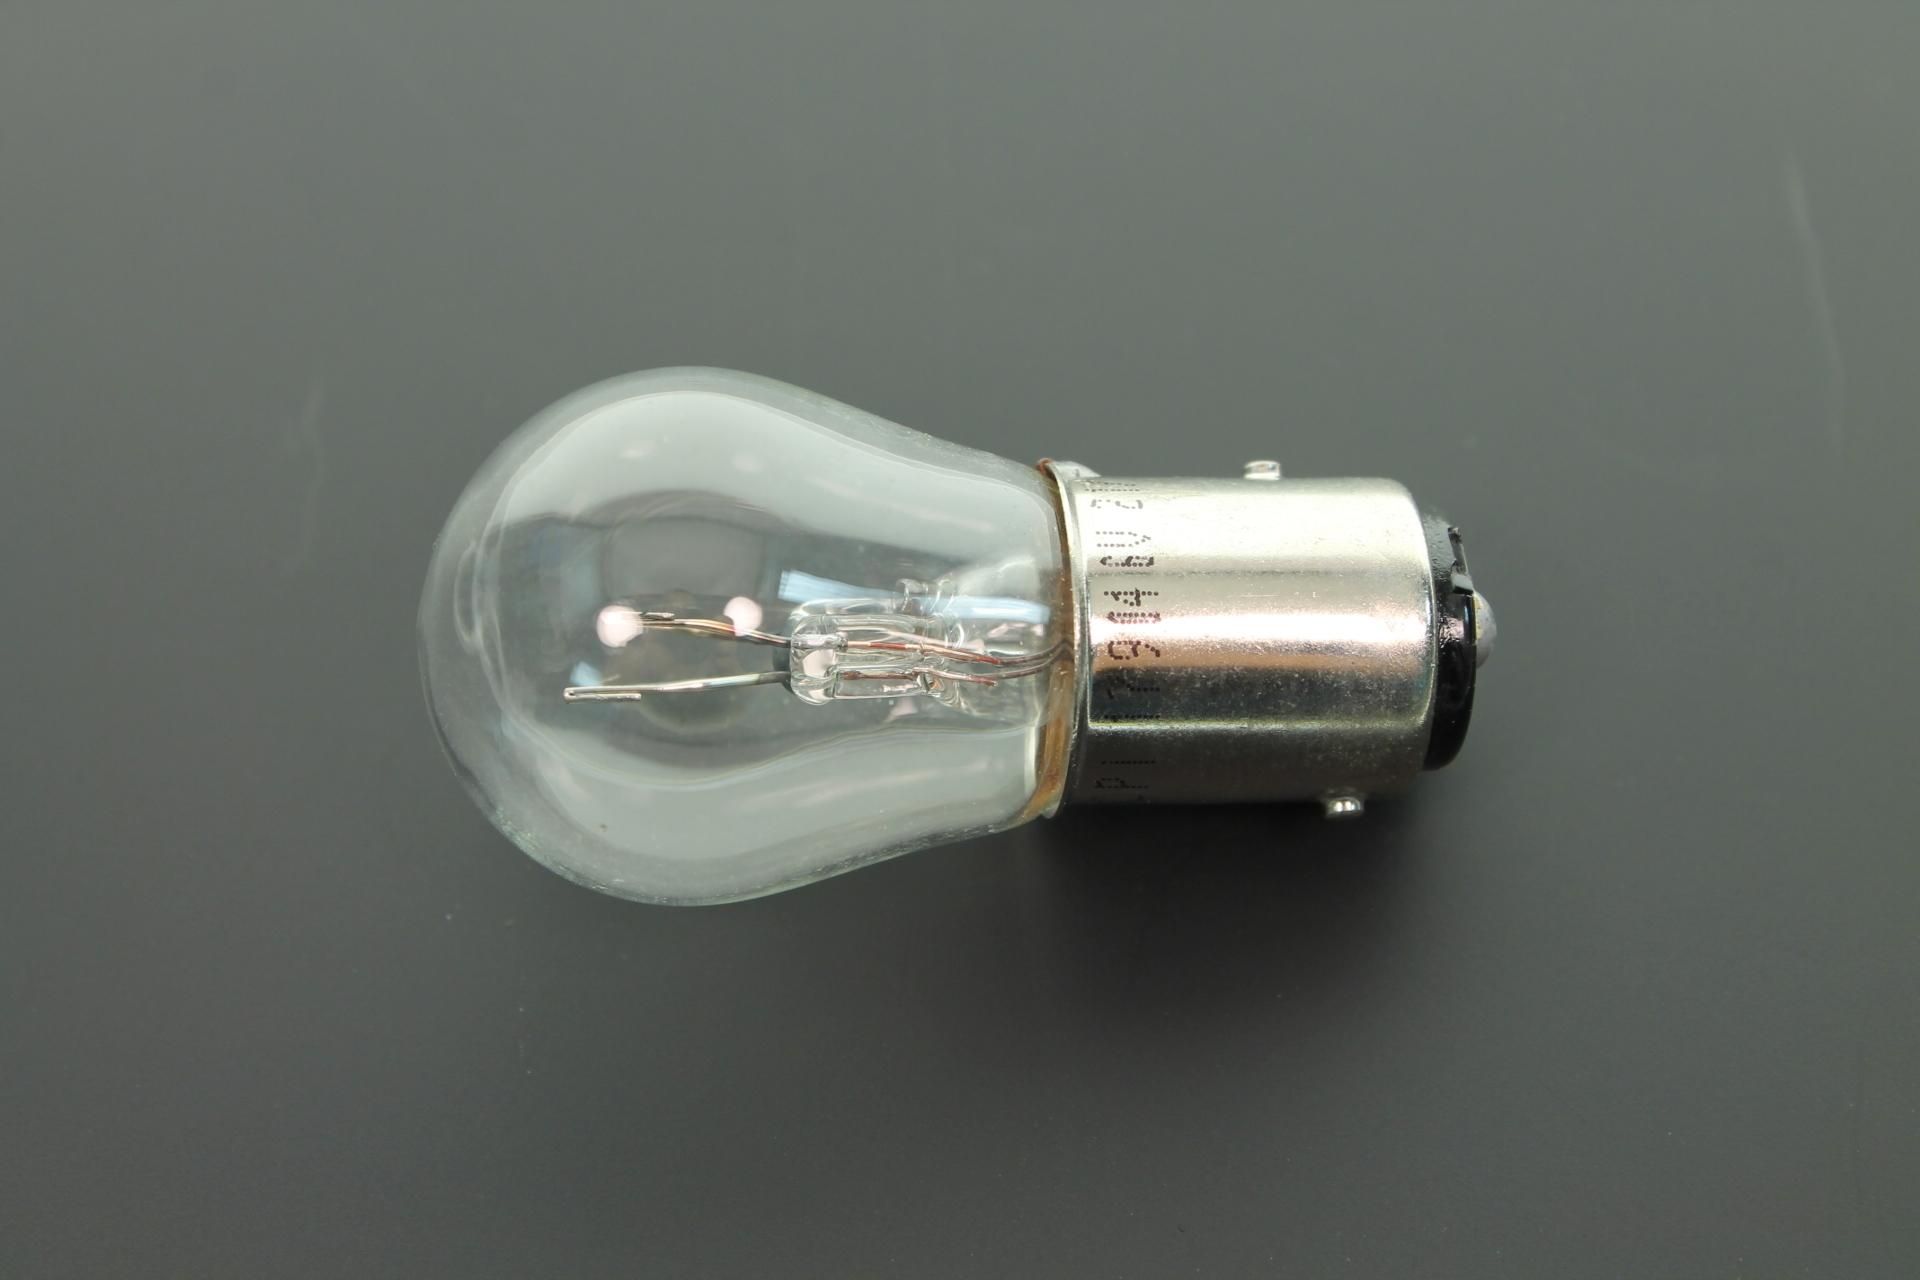 1M1-84514-60-00 Superseded by 1M1-84514-60-XX - BULB 6VP21/5W(17904)